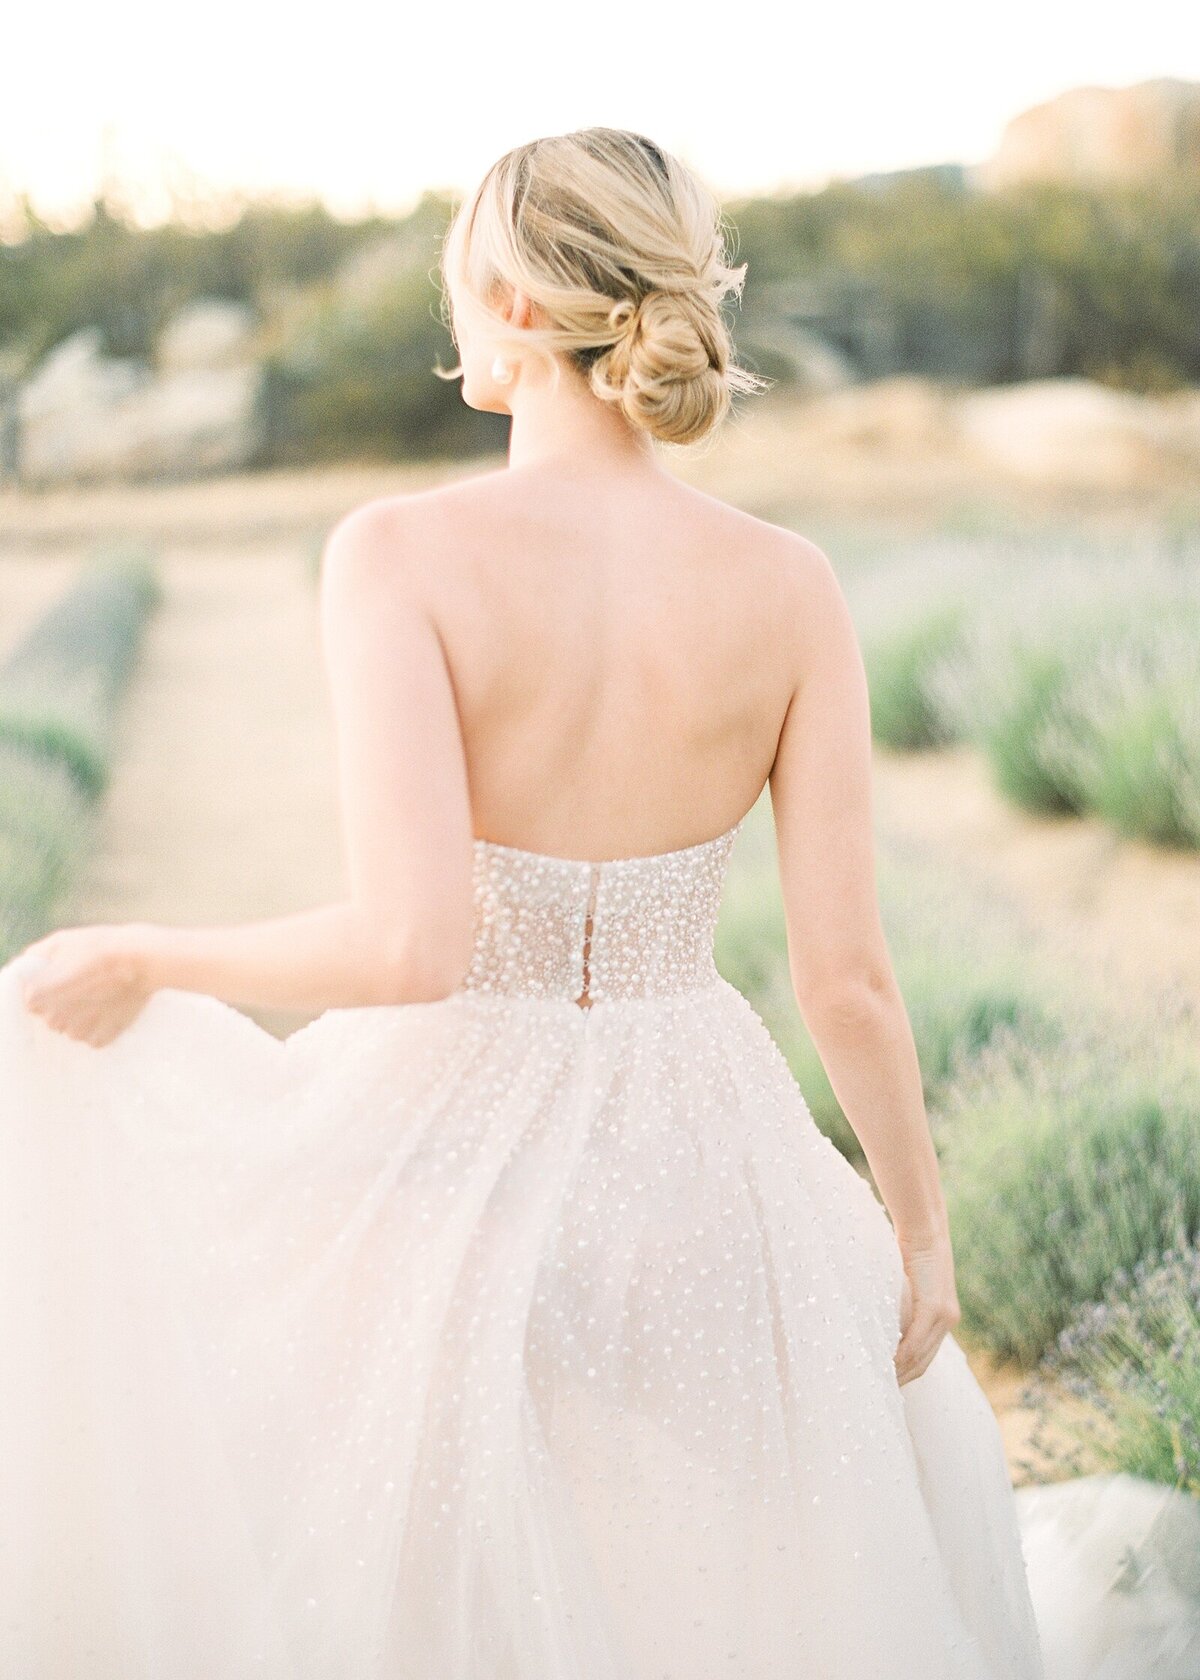 Bridal Editorial Photoshoot at the Lavender Fields in Fork and Plow Lavender Farms by Lisa Riley Photography based in La Jolla, California.